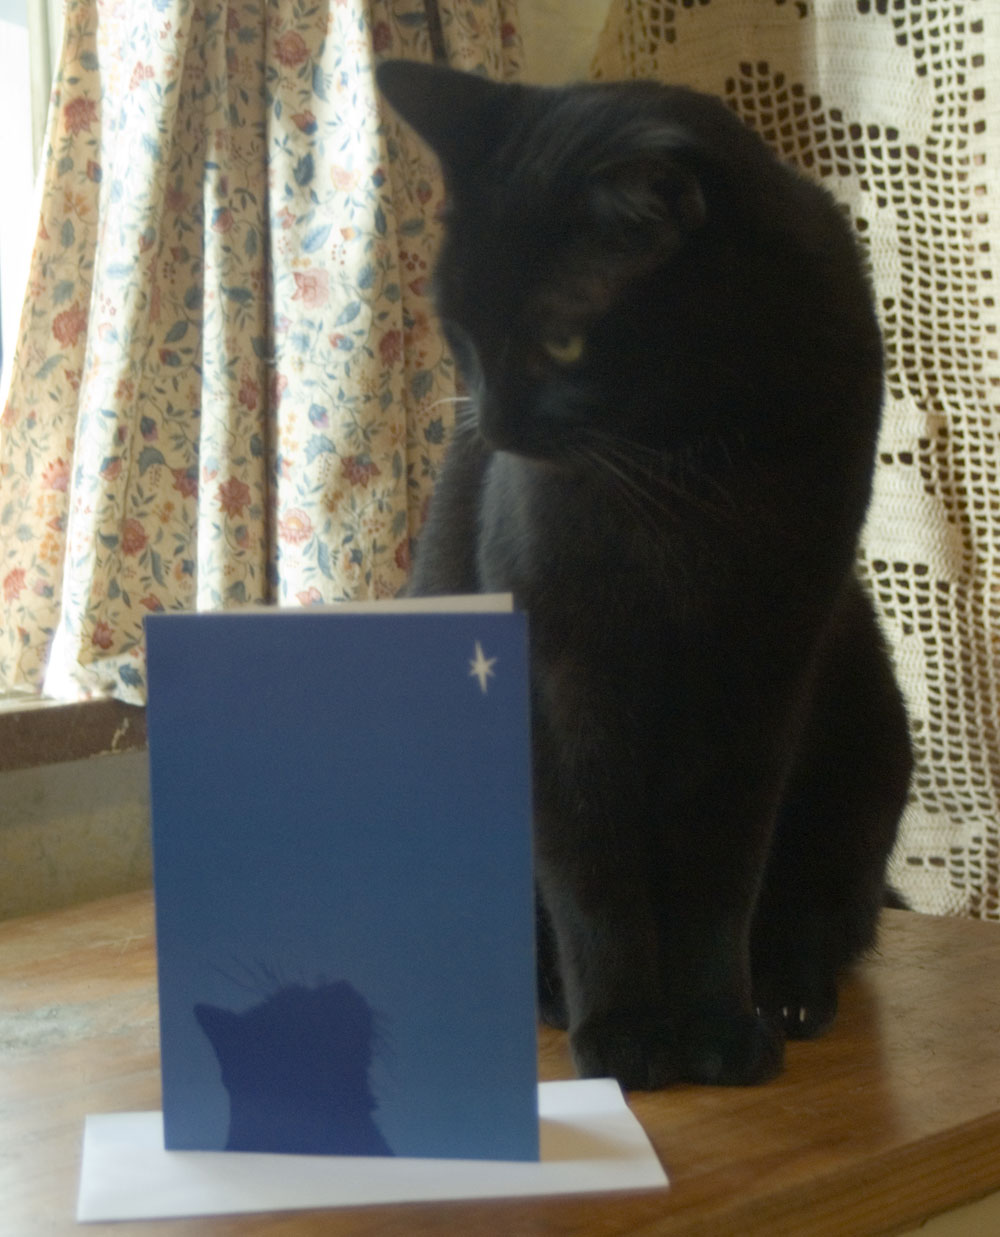 Giuseppe thoughtfully ponders the meaning of this card.